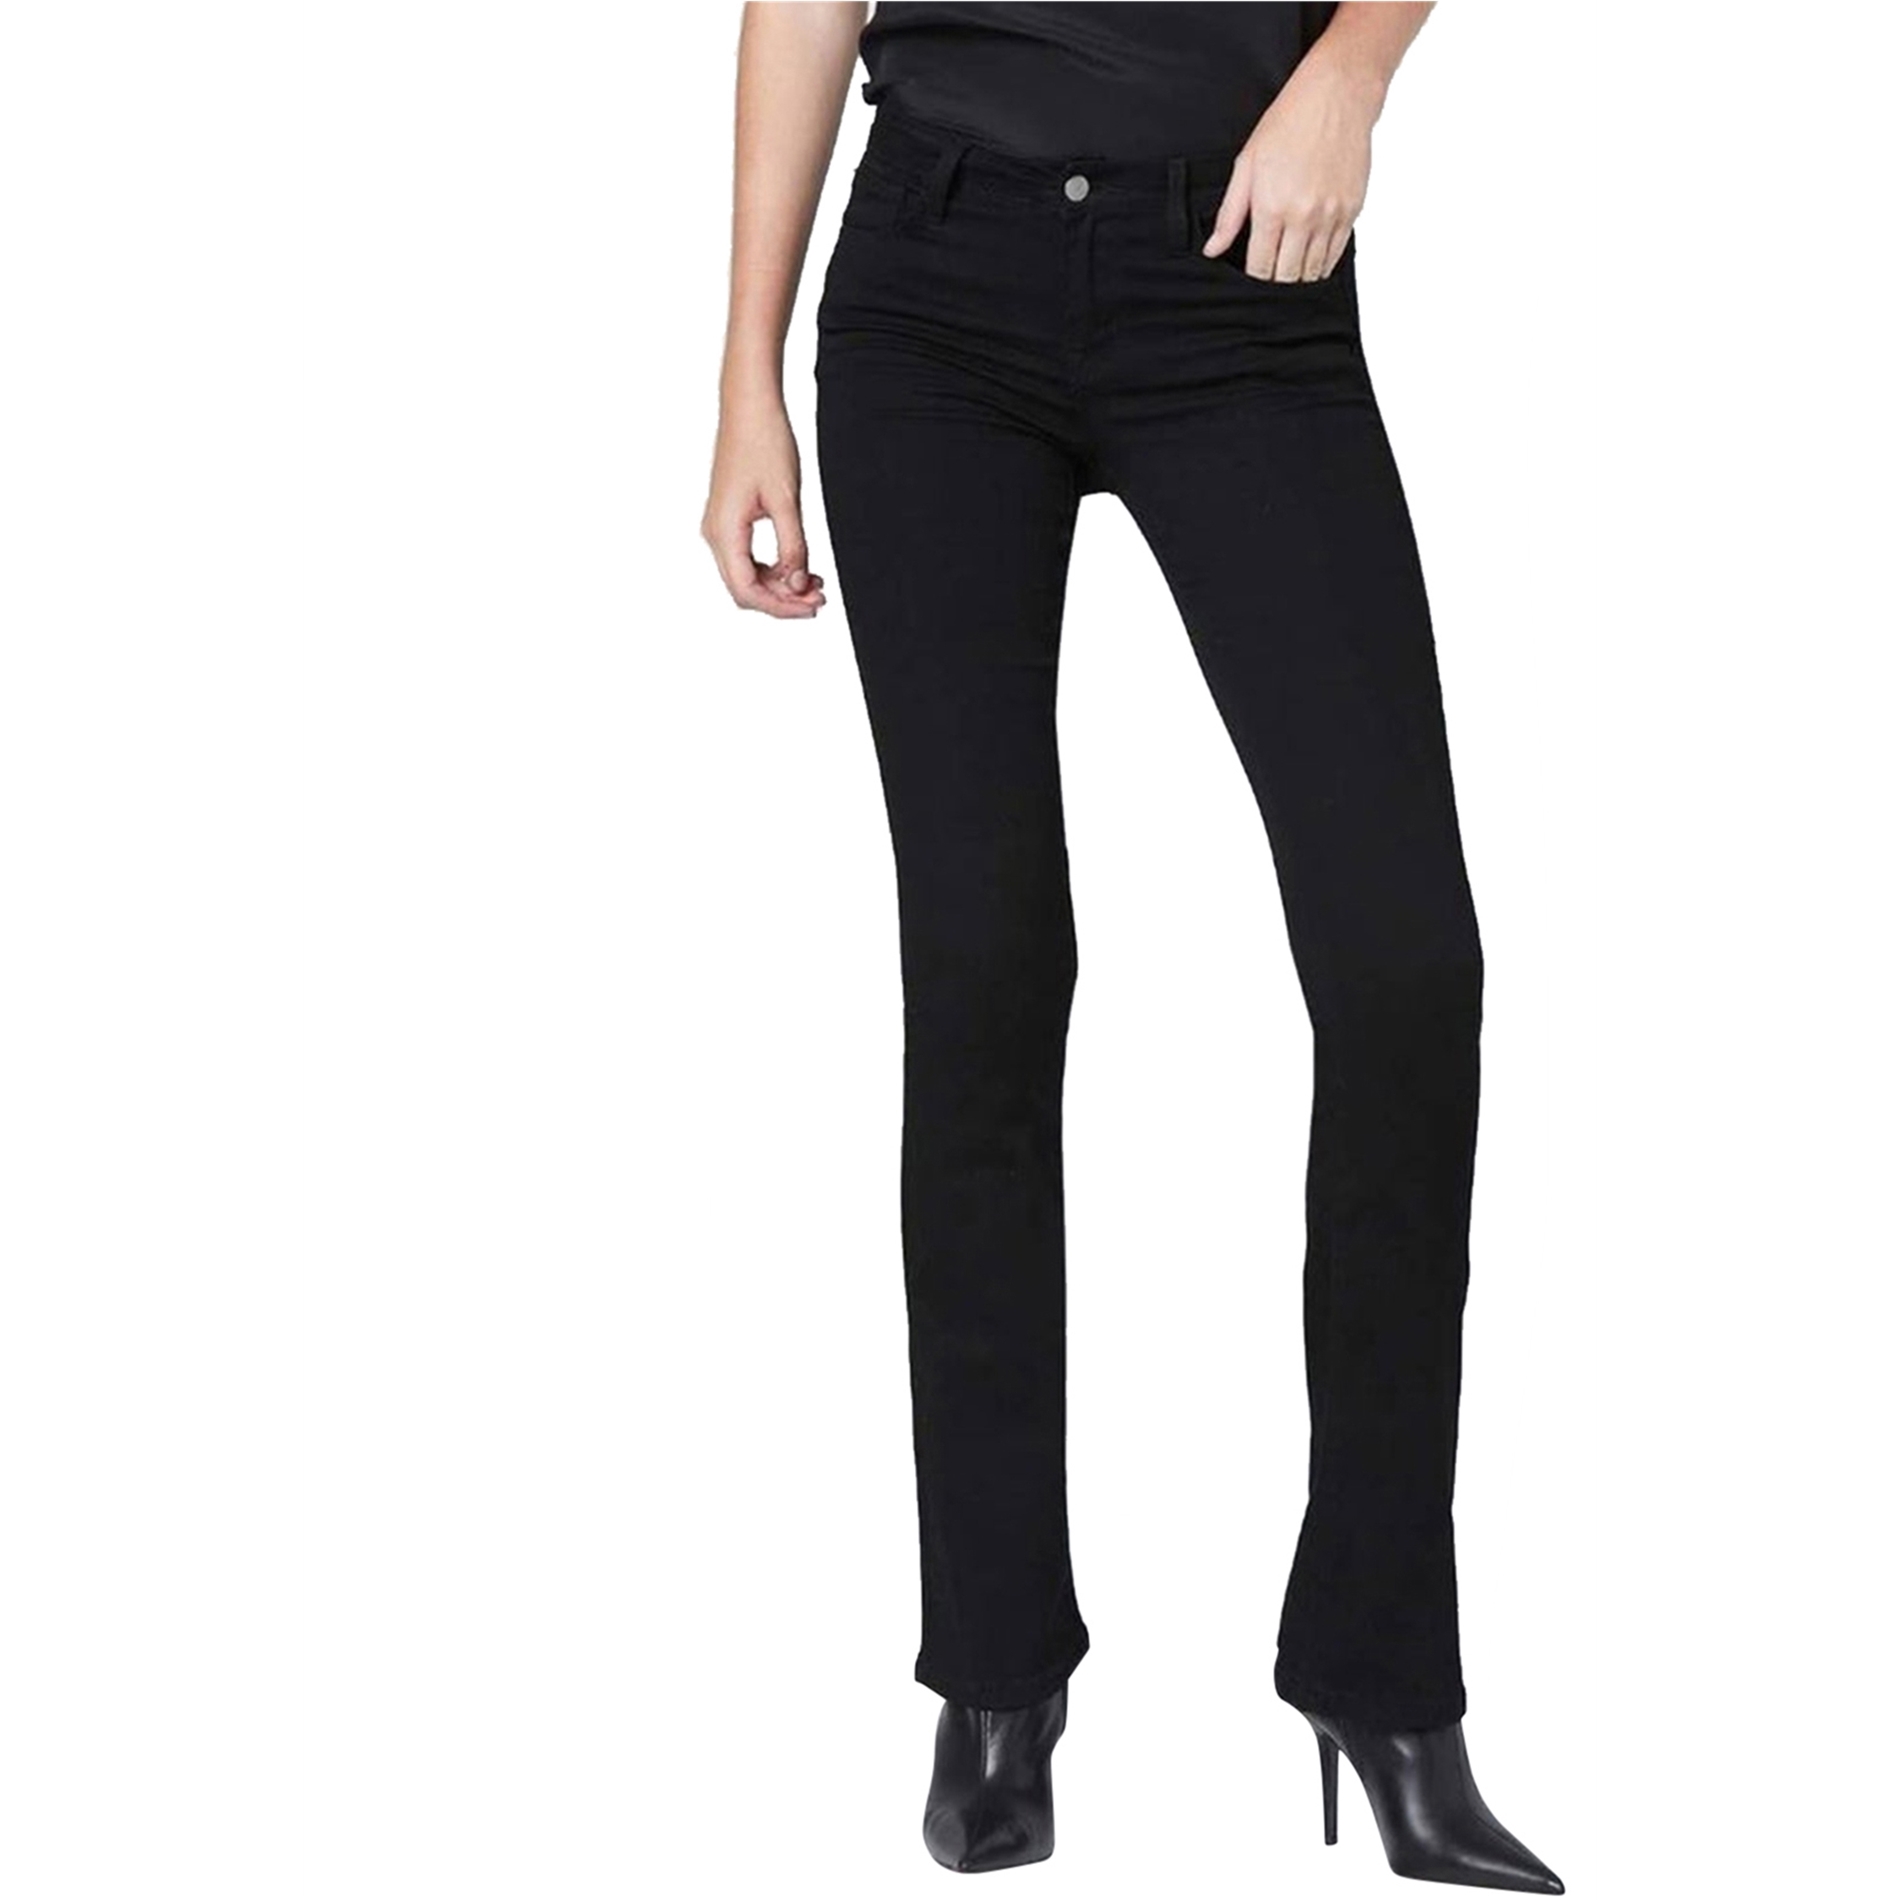 Dstld Womens Solid Skinny Fit Jeans